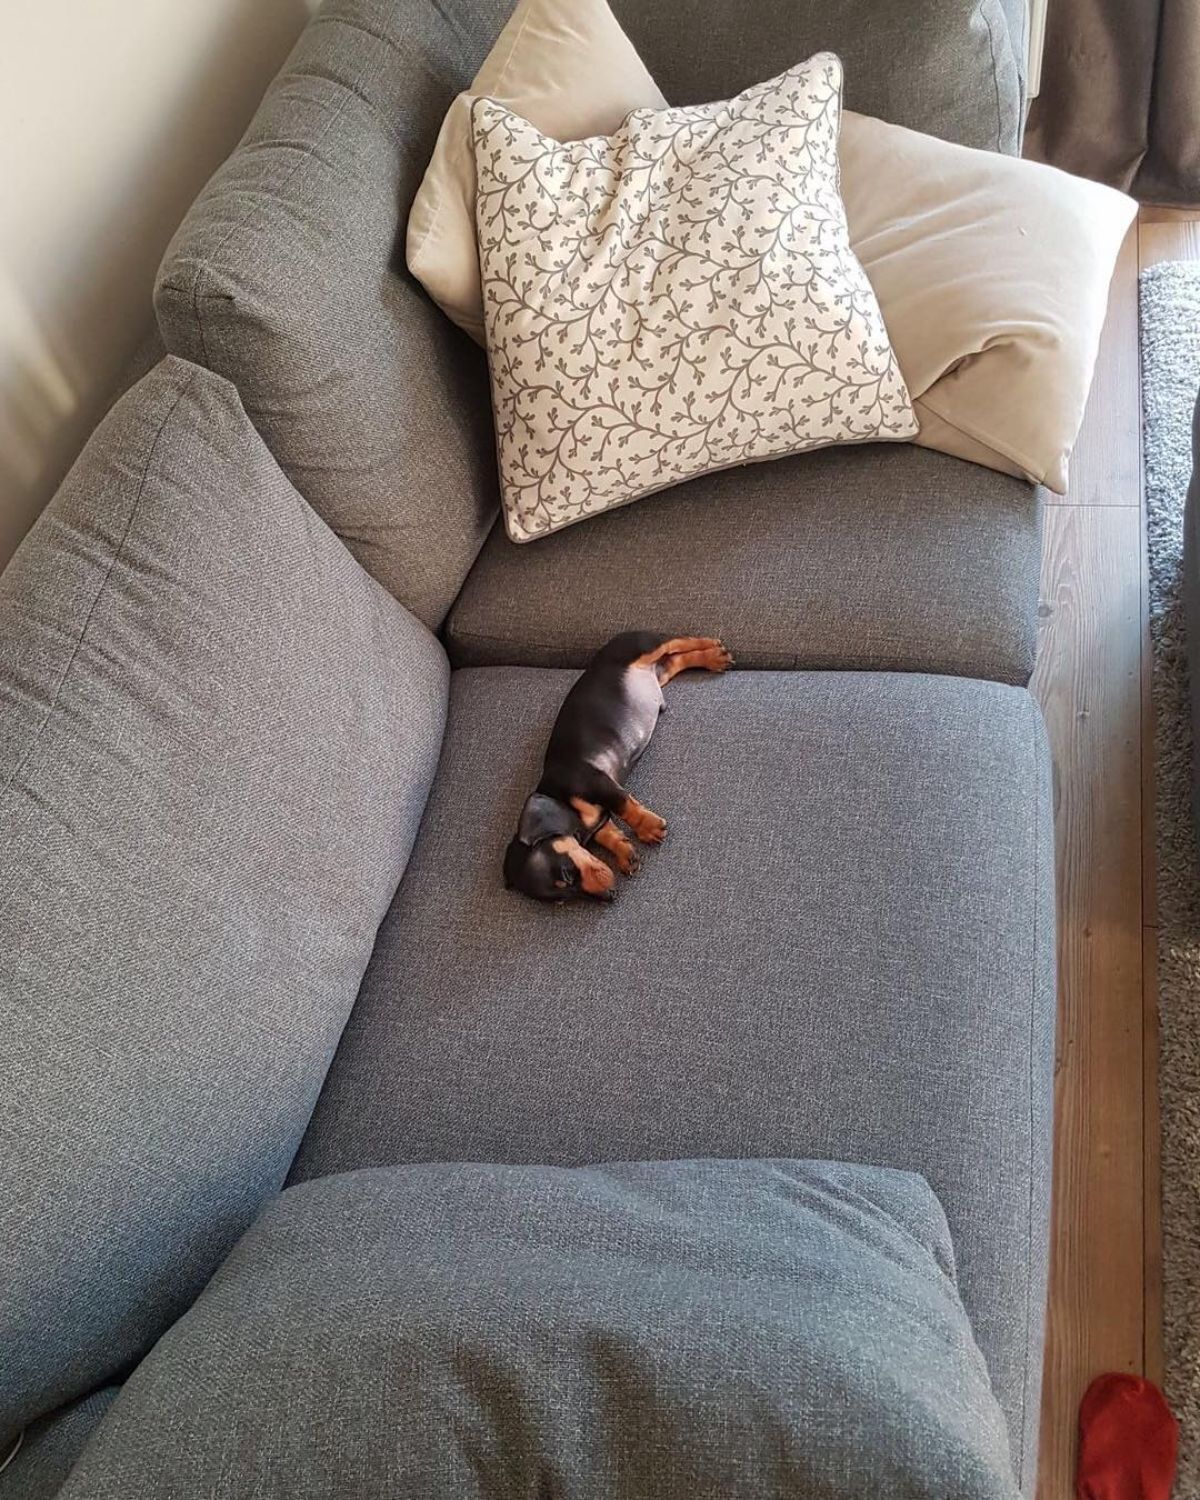 black and brown dachshund puppy sleeping on a grey couch